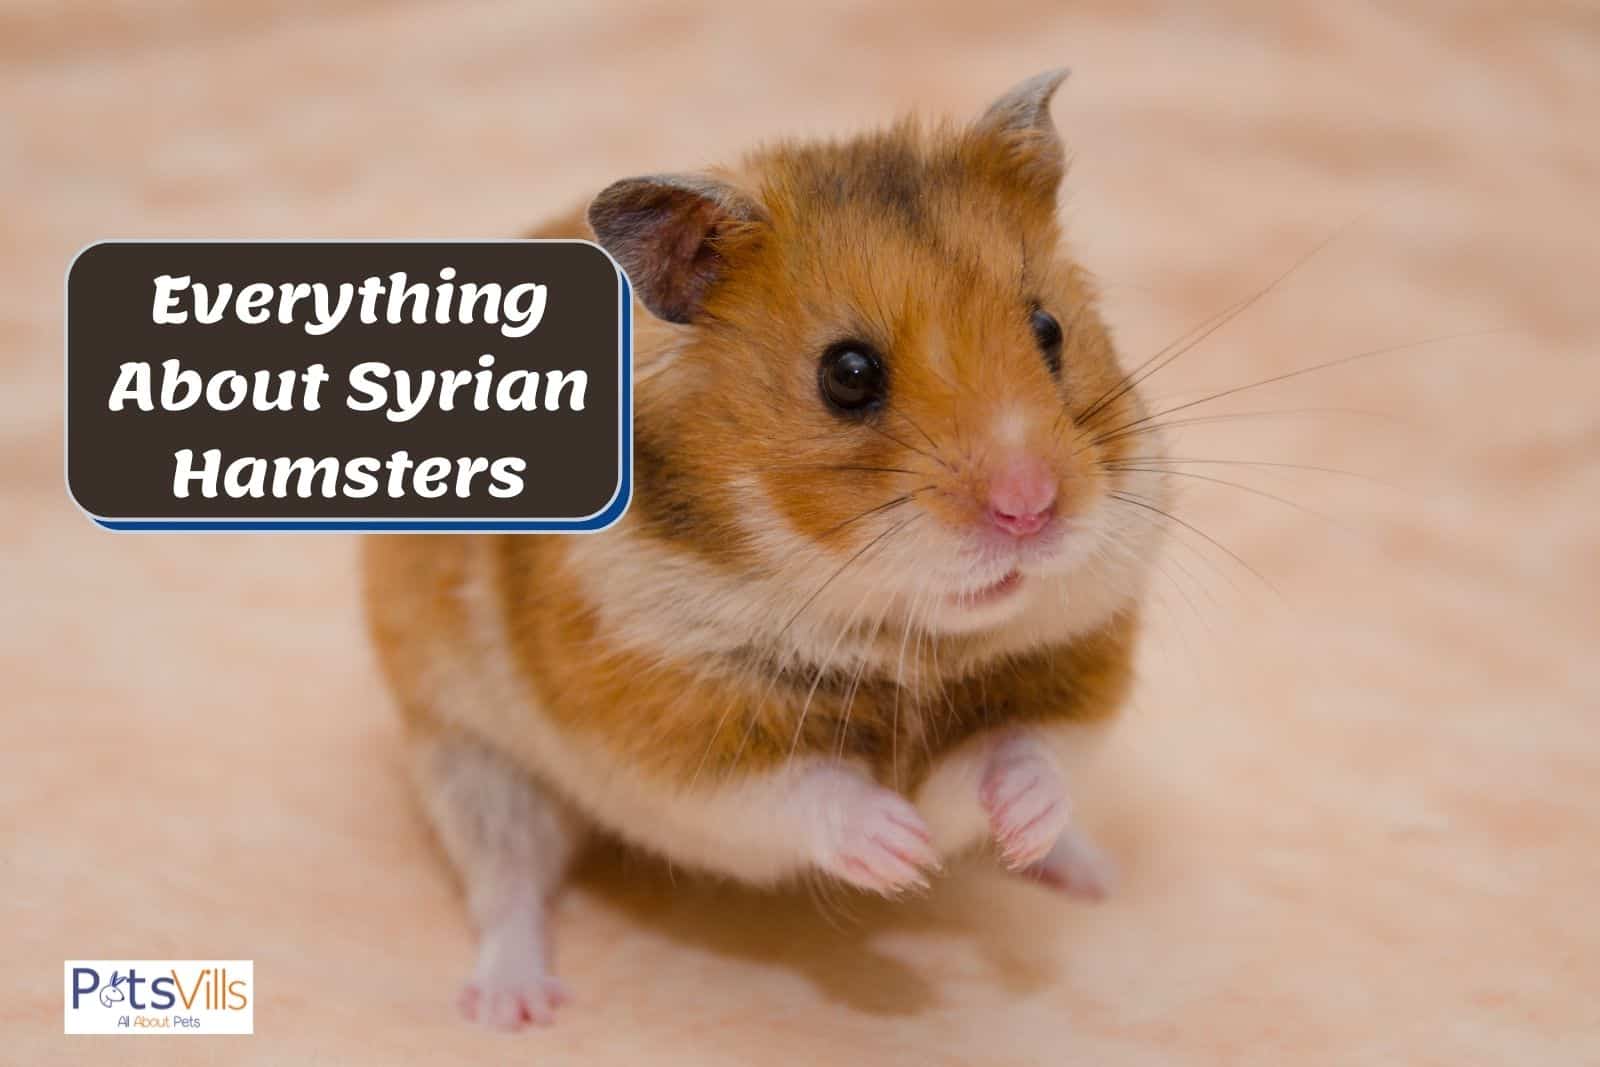 Side by side comparison of short-haired and long-haired Syrian hamster